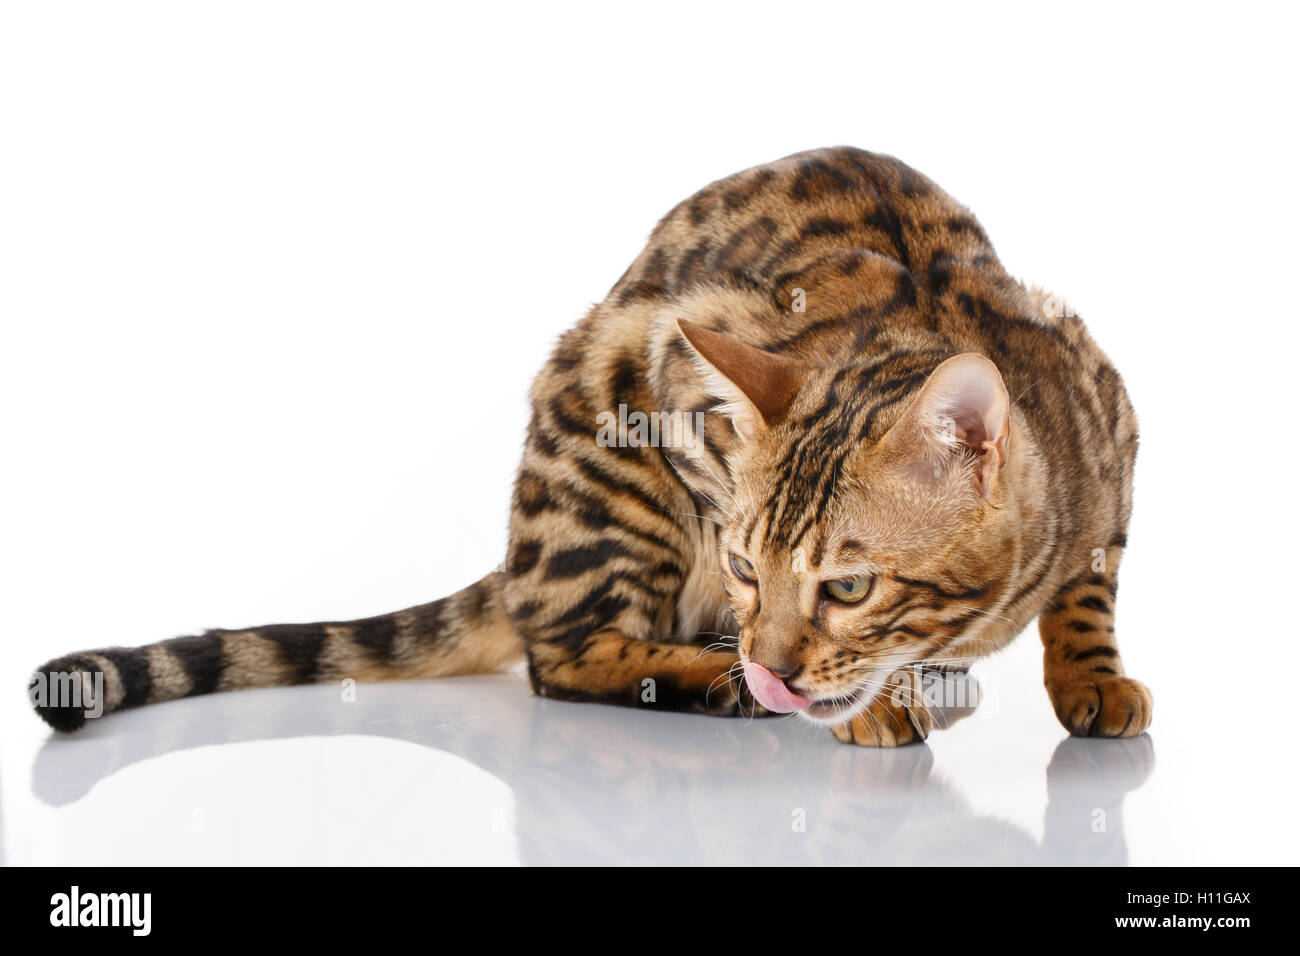 Cats Bengal breed. Isolated on white Stock Photo